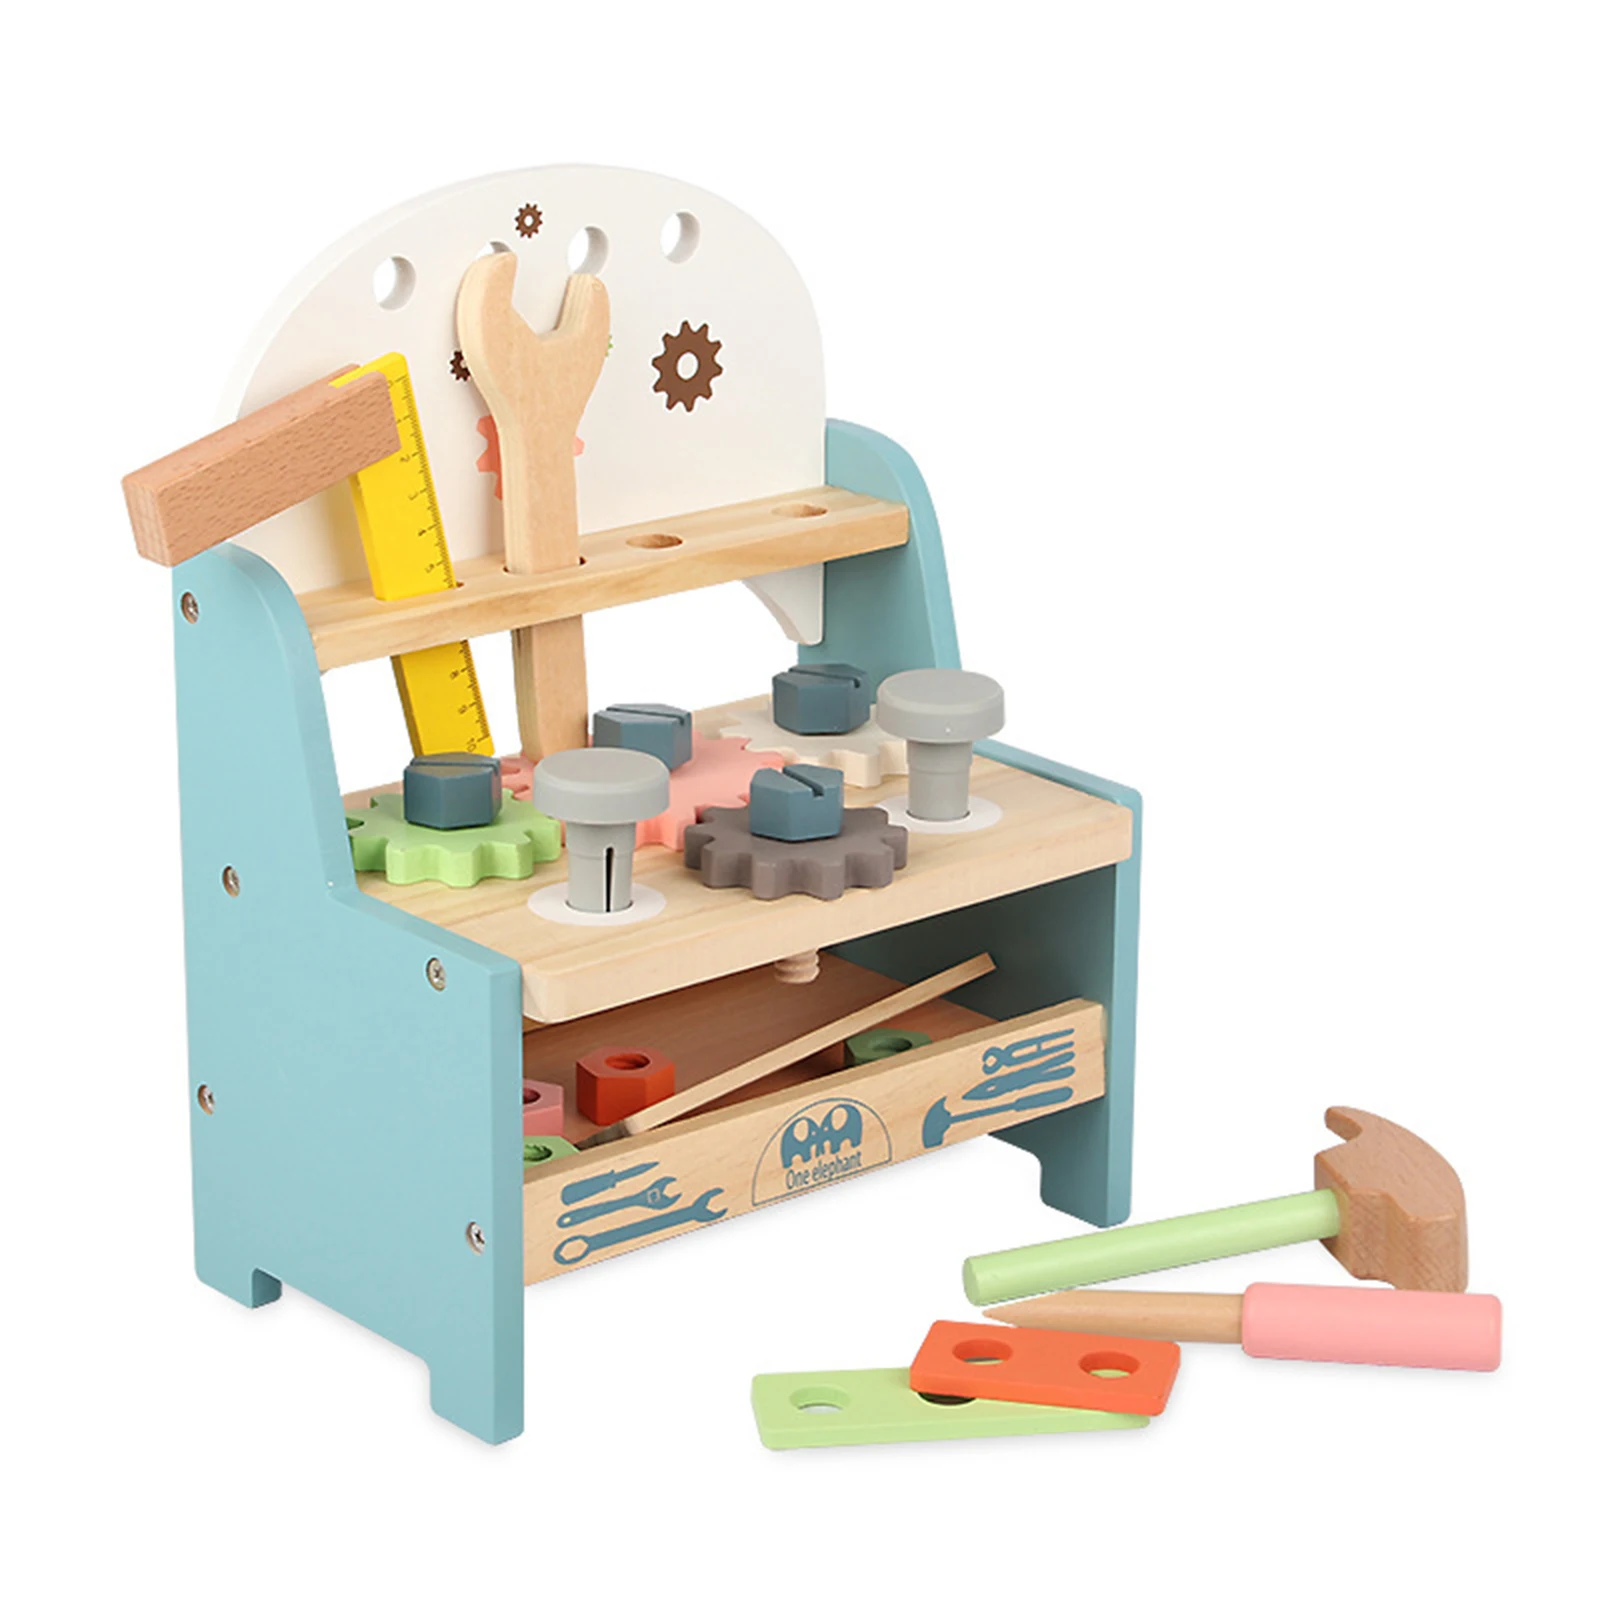 26PCS Creative Wood Workbench Workshop Hand Tool Funny Tools Gift for Kids